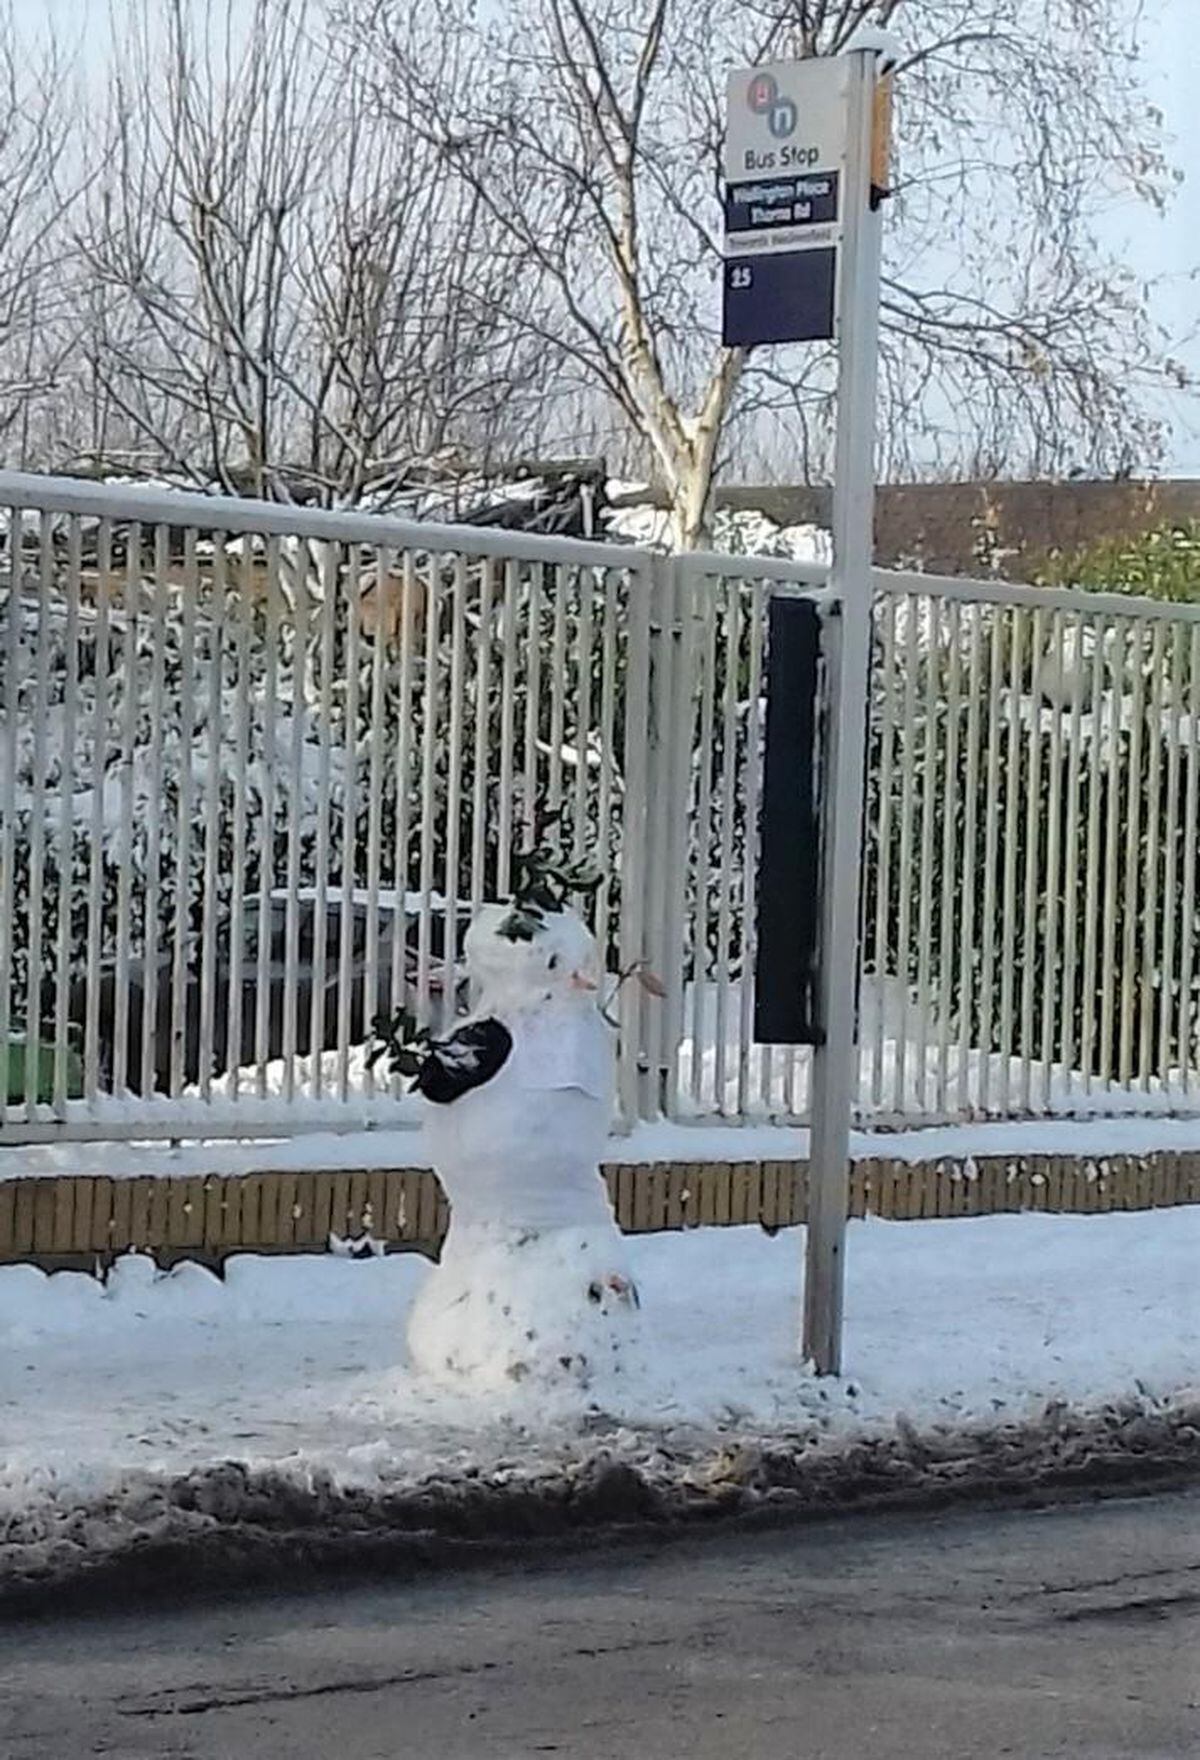 Diane Simpson took this picture of a snowman waiting for a bus in Willenhall